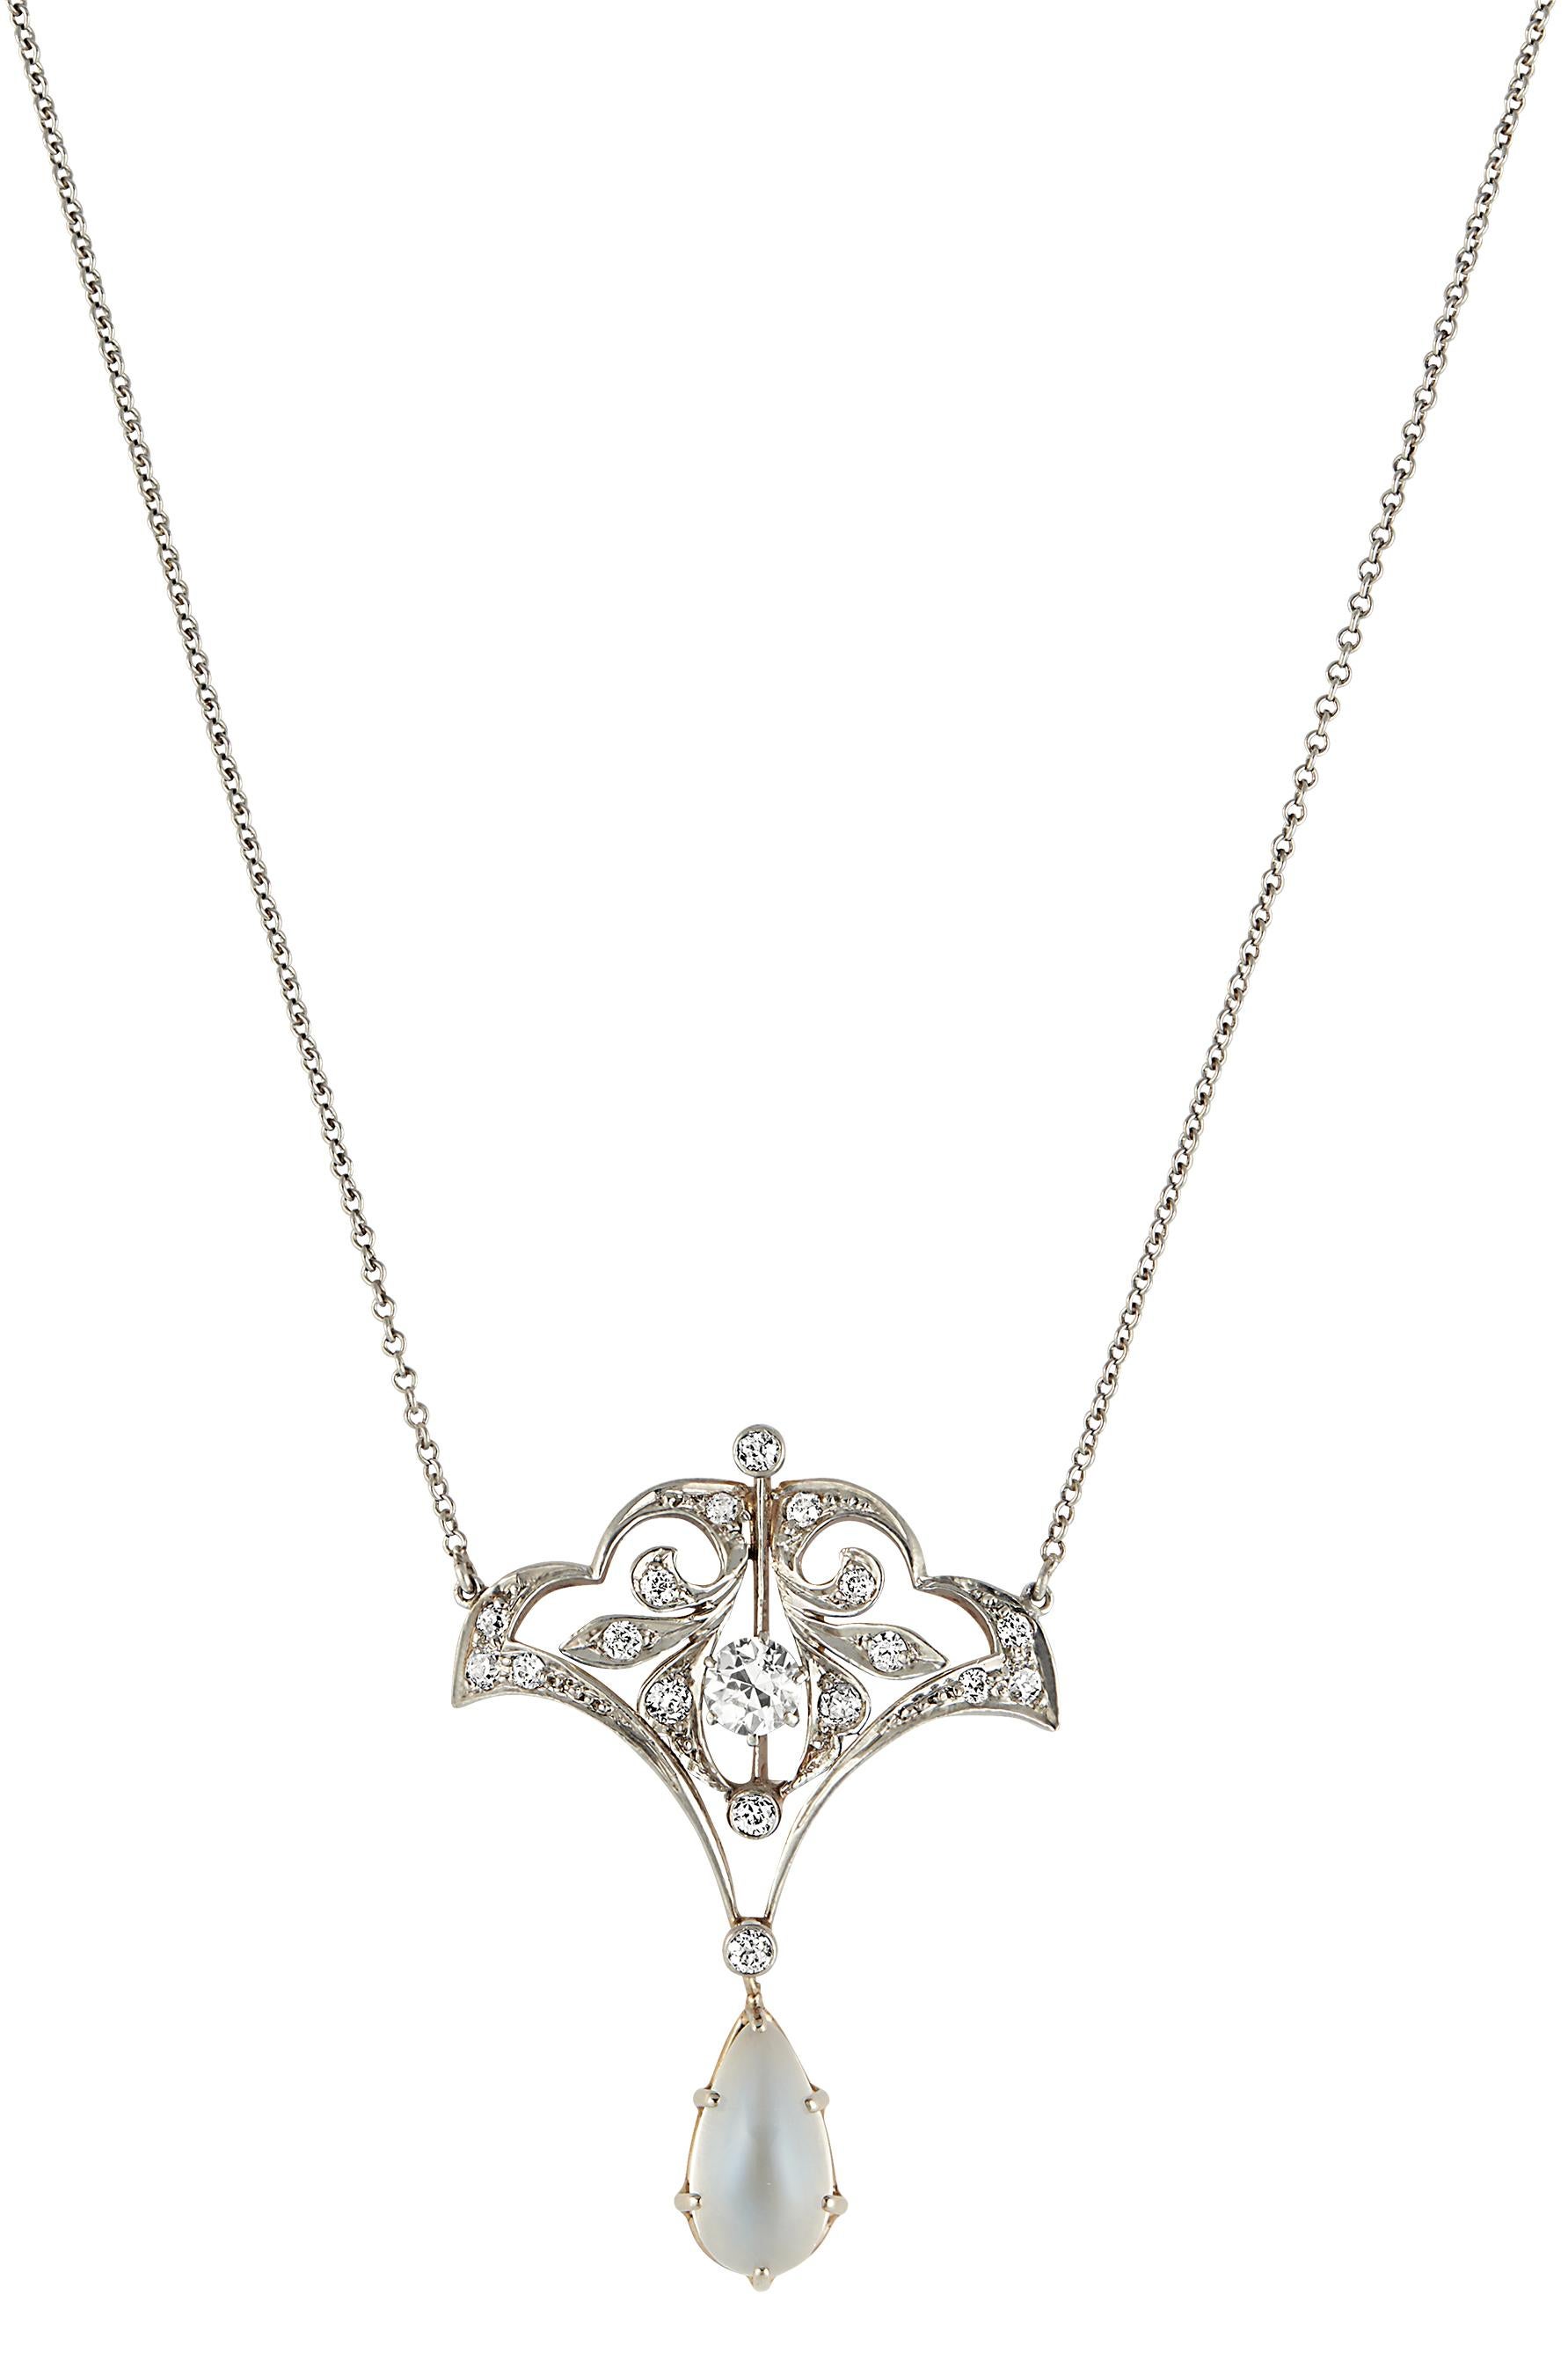 A stunning antique piece of jewelry is the best way to add a unique flair to a jewelry collection. This piece uses the unique look of Moonstone and brilliance of diamonds to stand out in a crowd. This piece is deserving of attention without